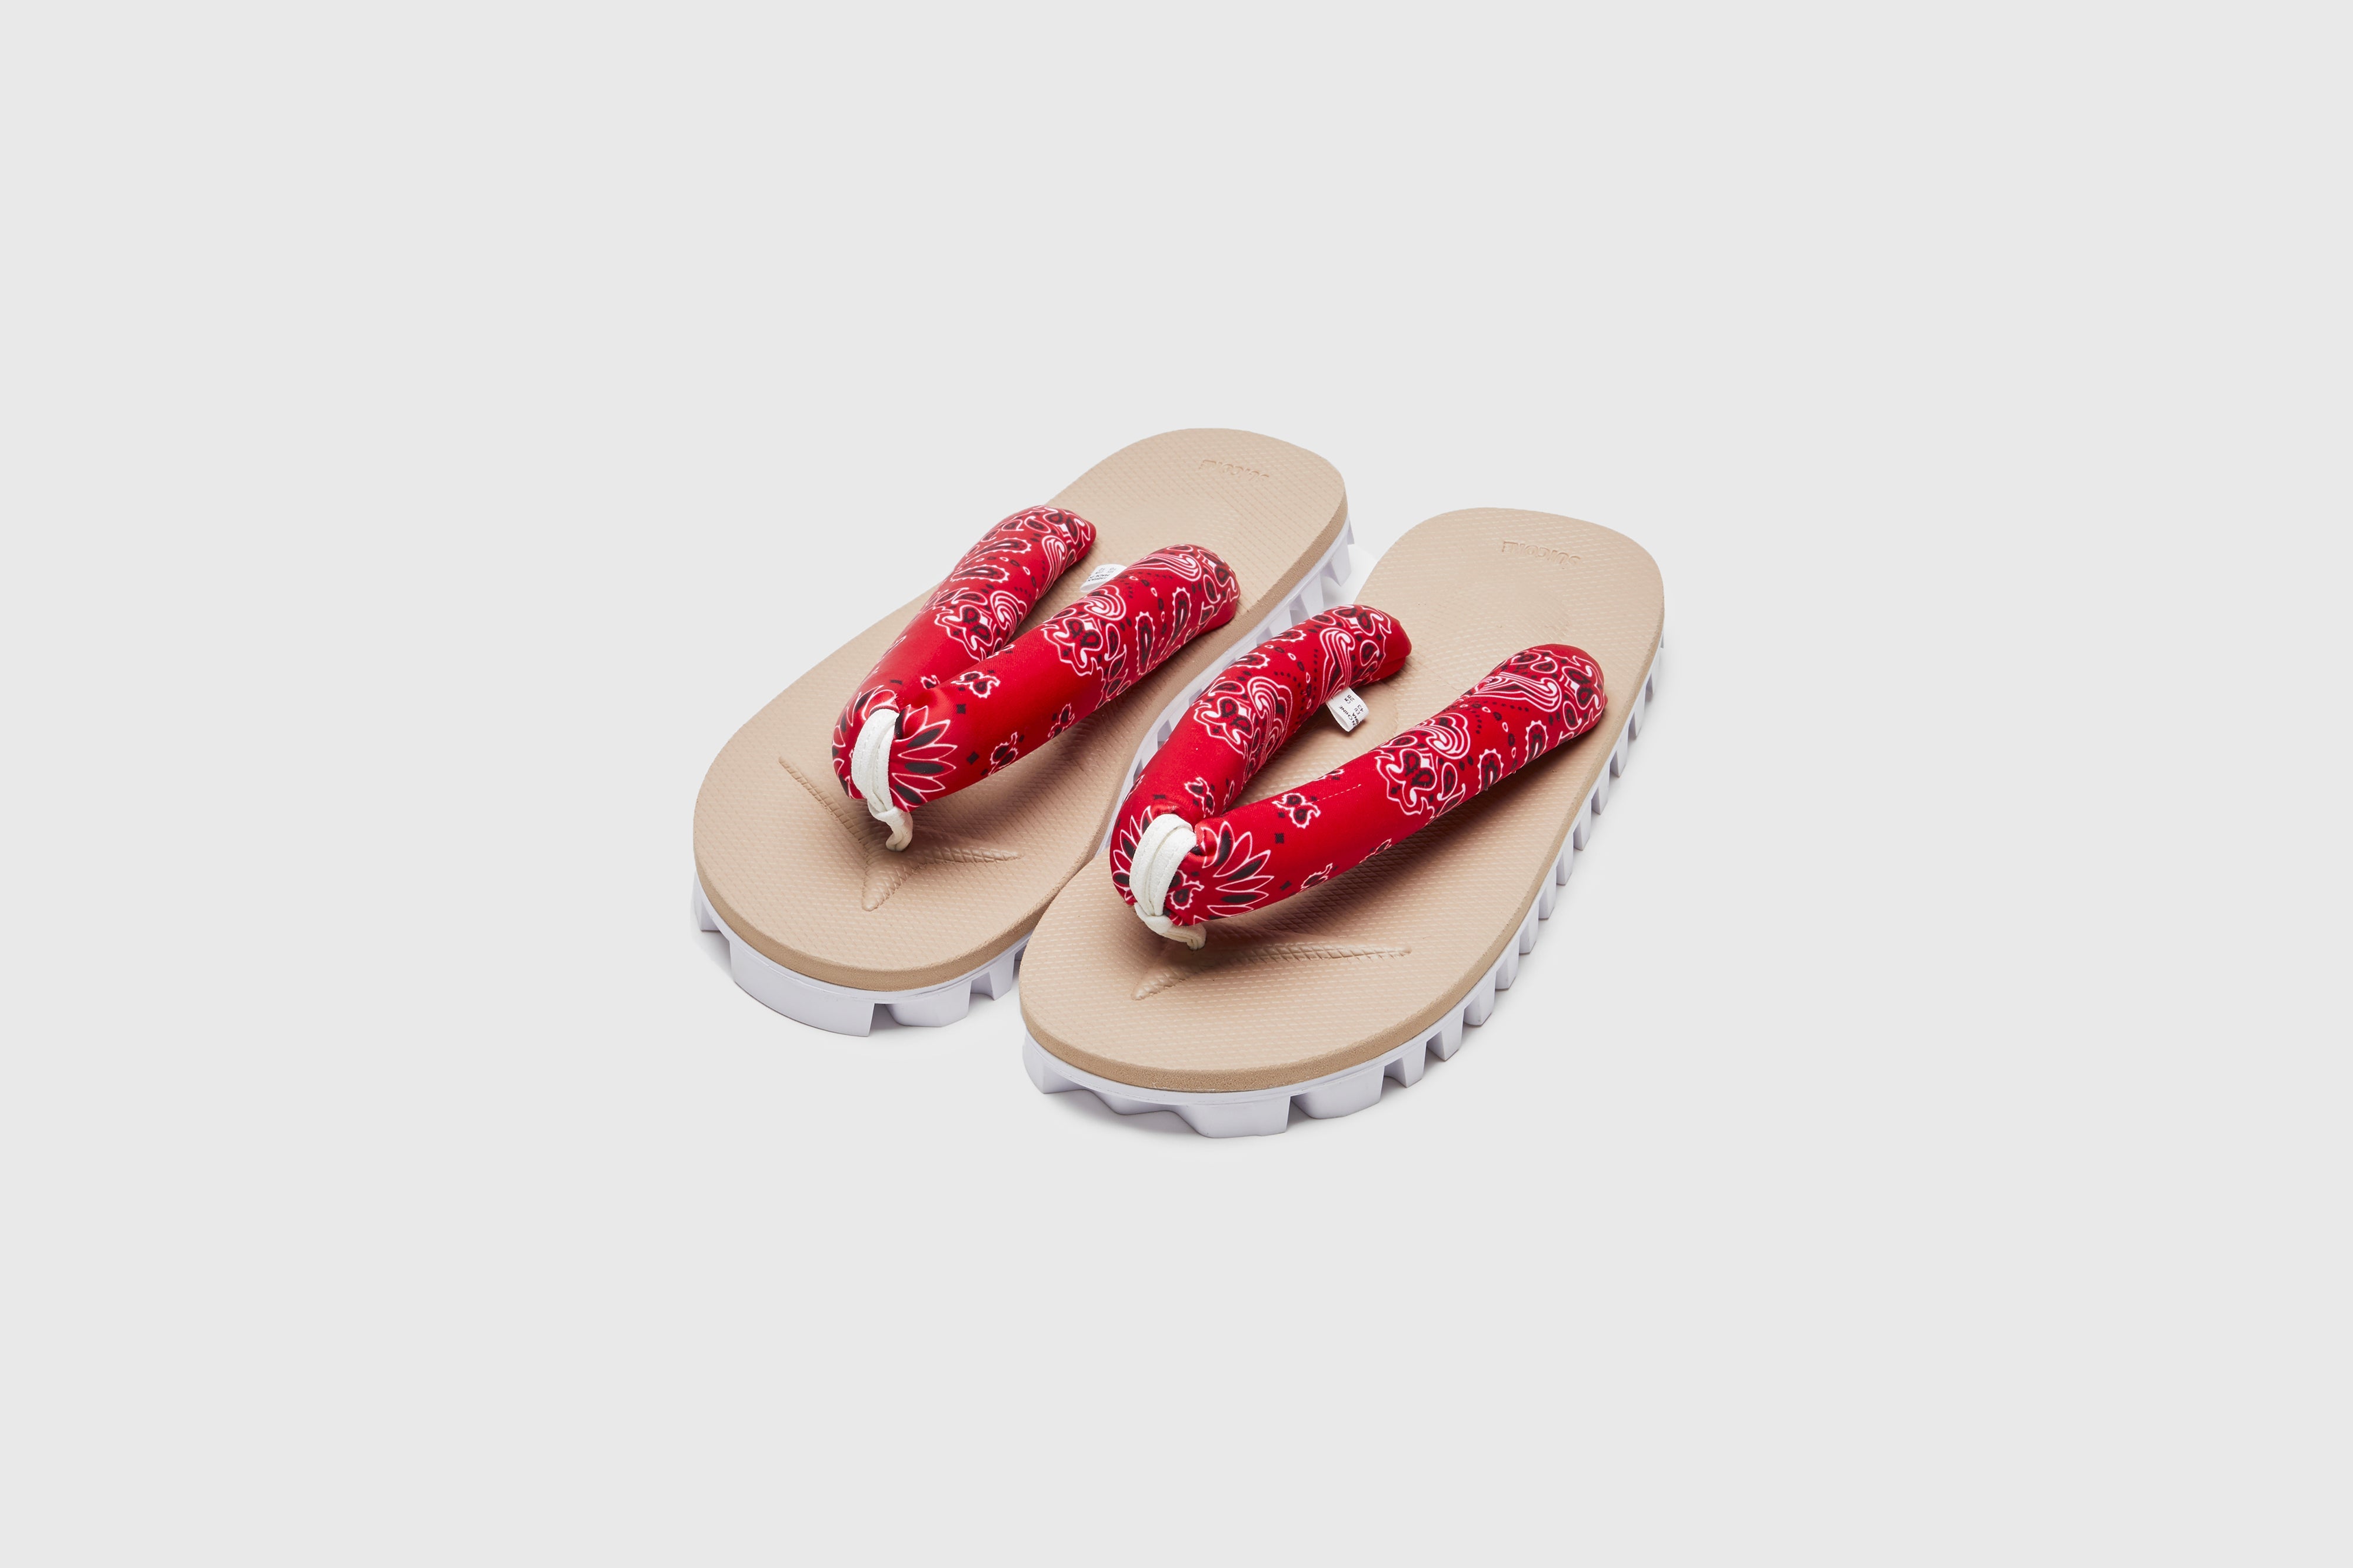 SUICOKE GTA-PT05 sandals with red & beige nylon upper, red & beige midsole and sole, strap and logo patch. From Spring/Summer 2023 collection on eightywingold Web Store, an official partner of SUICOKE. OG-226-PT05 RED X BEIGE